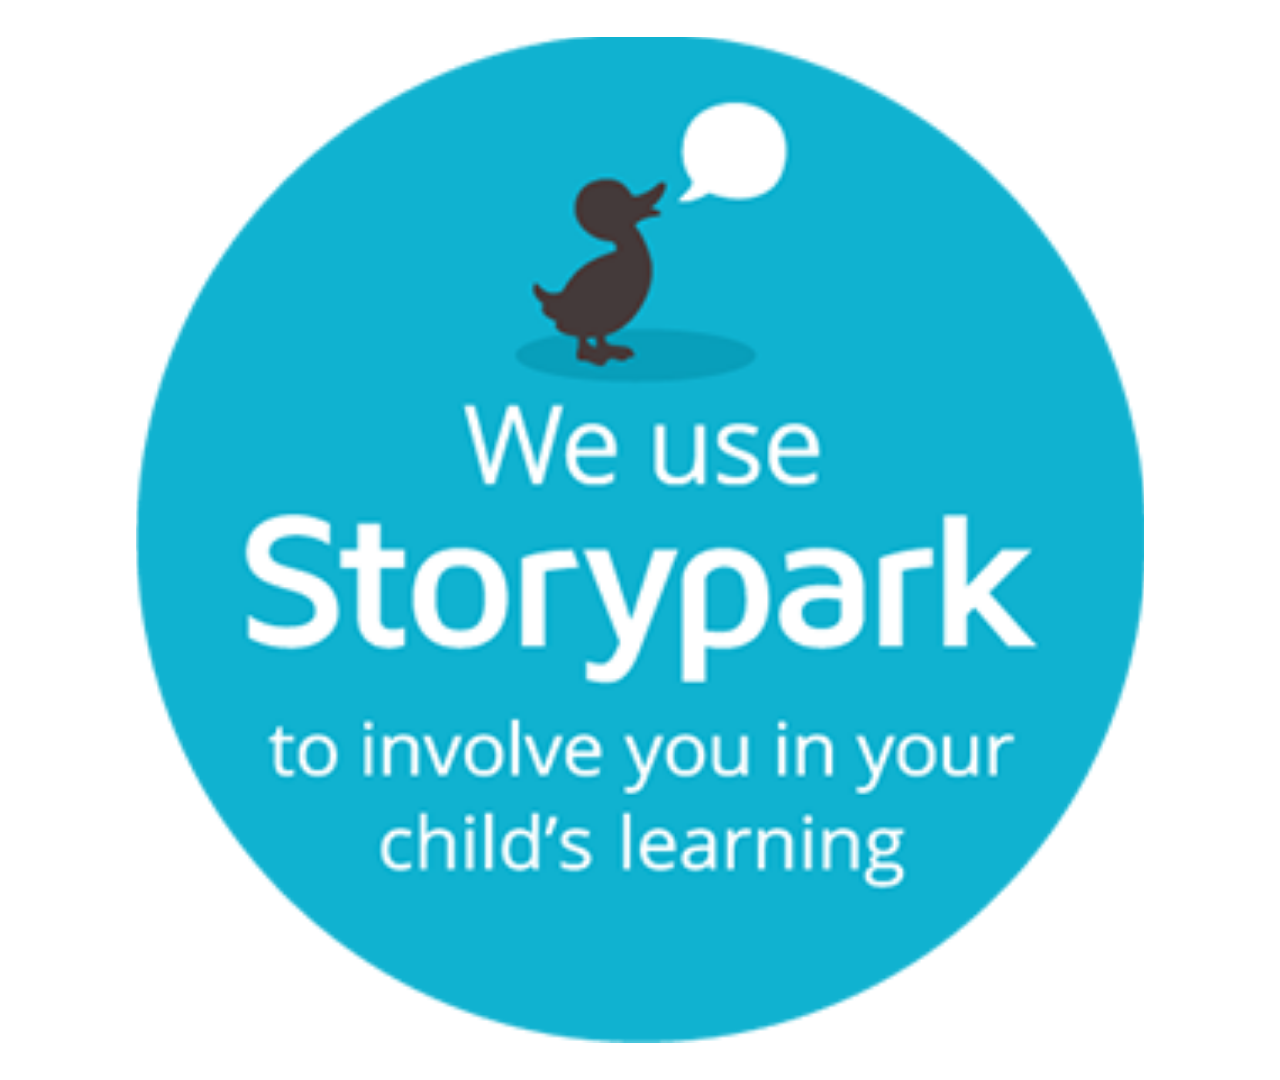 Log in to Storypark